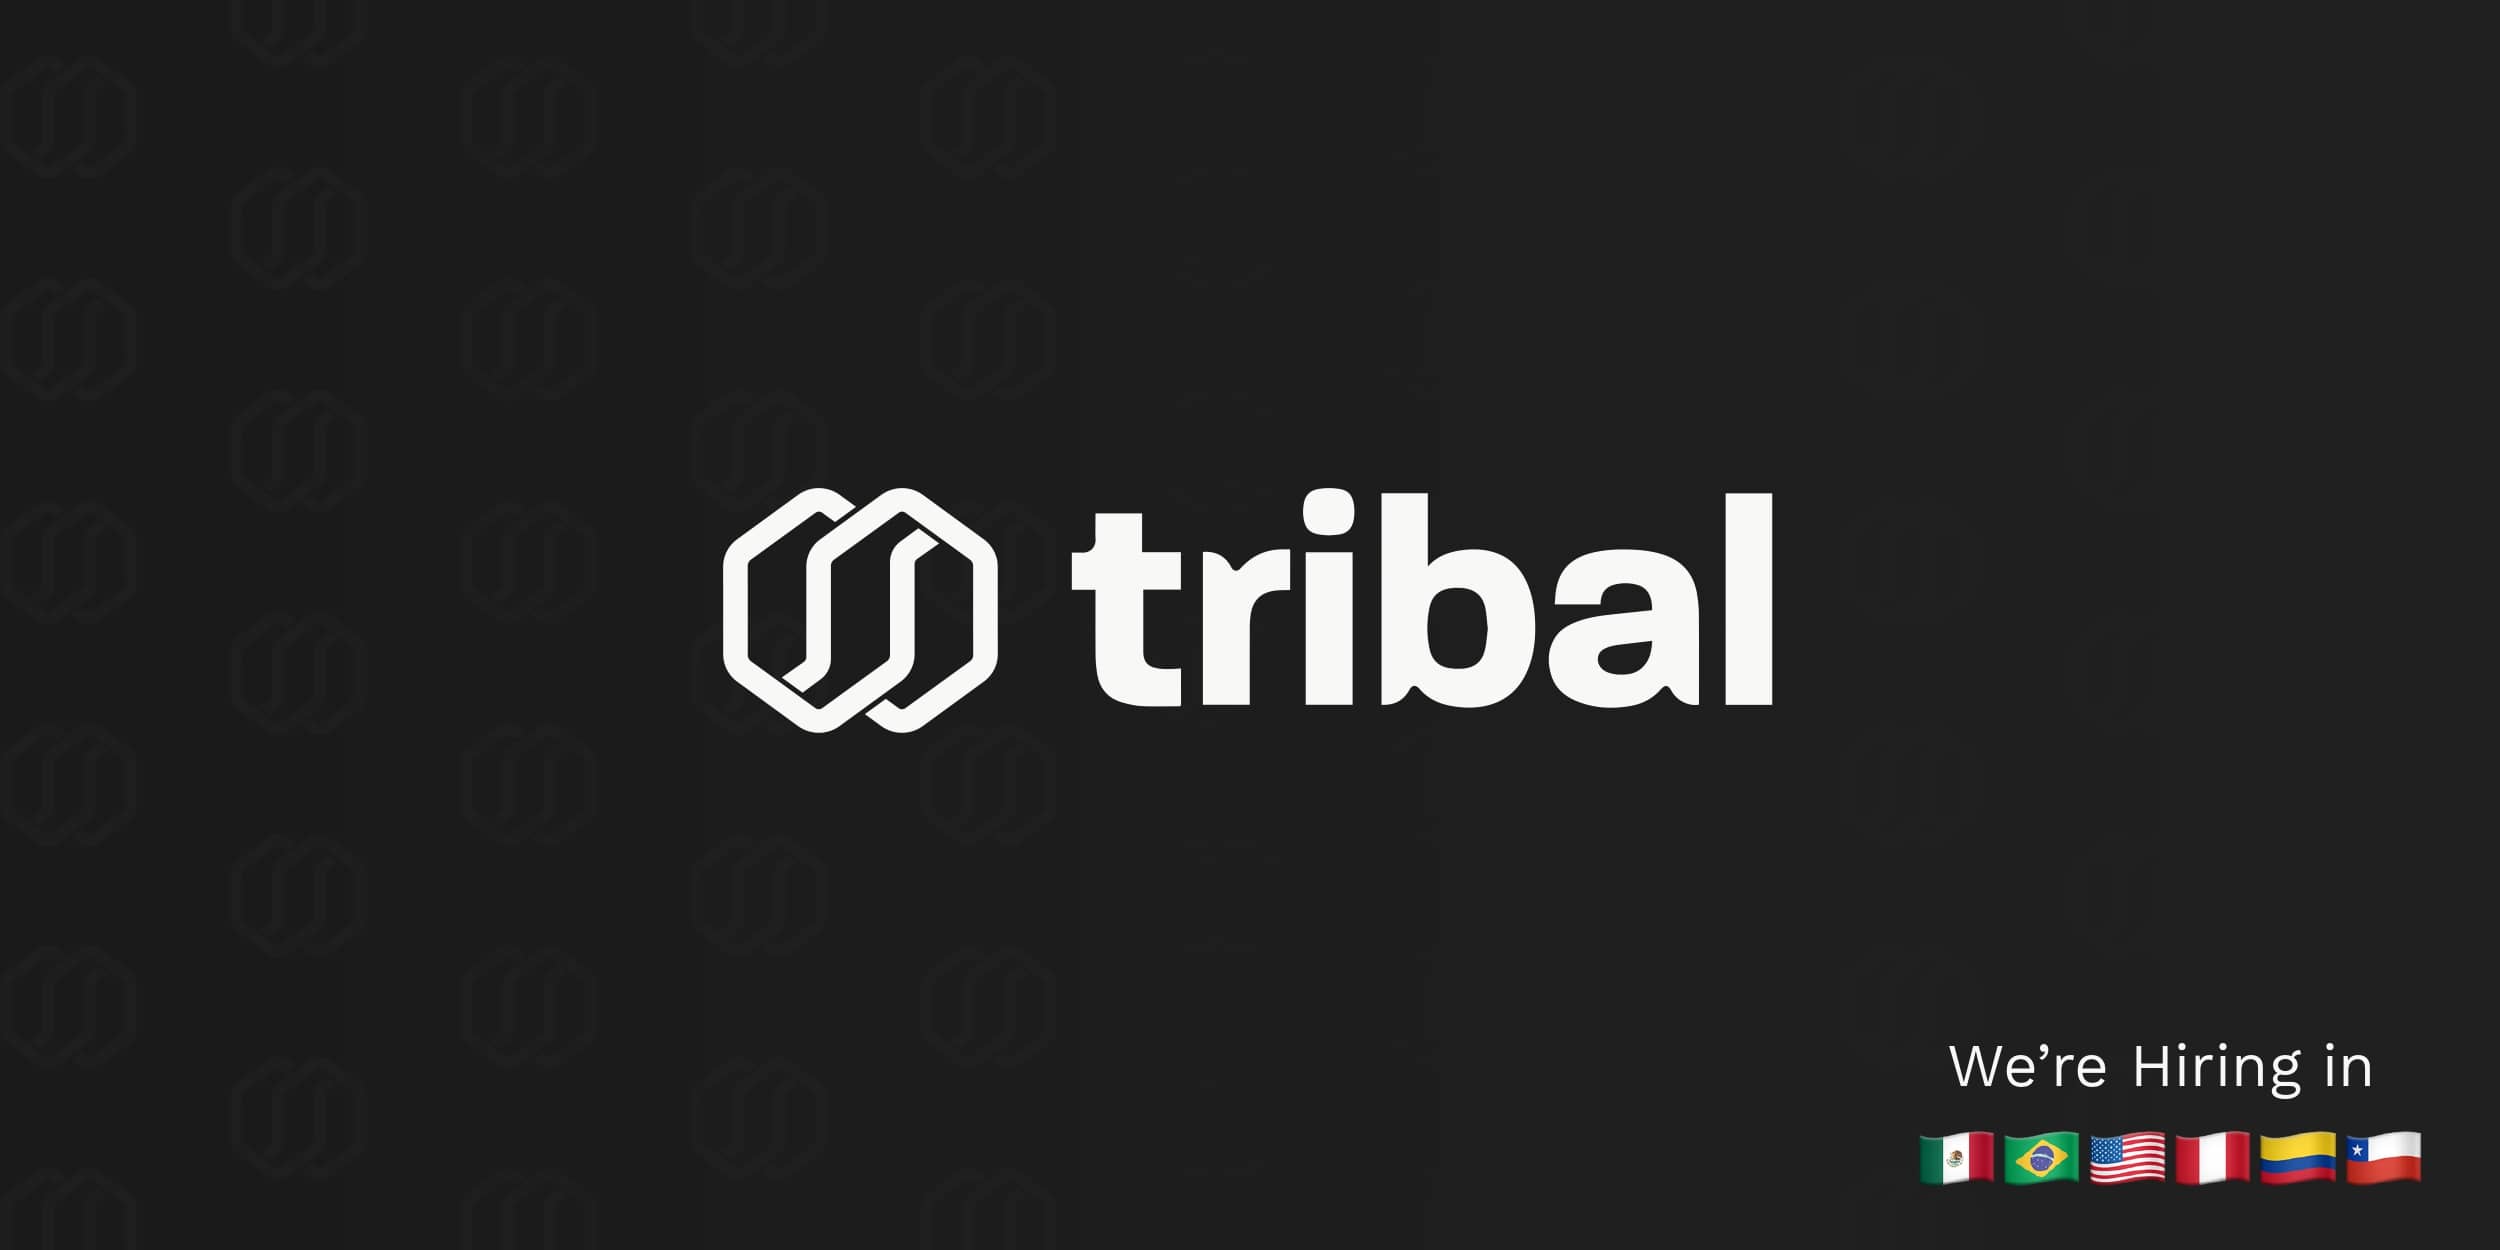 Tribal Expands Financing, Payment Services to SMBs in 3 More LatAm Markets